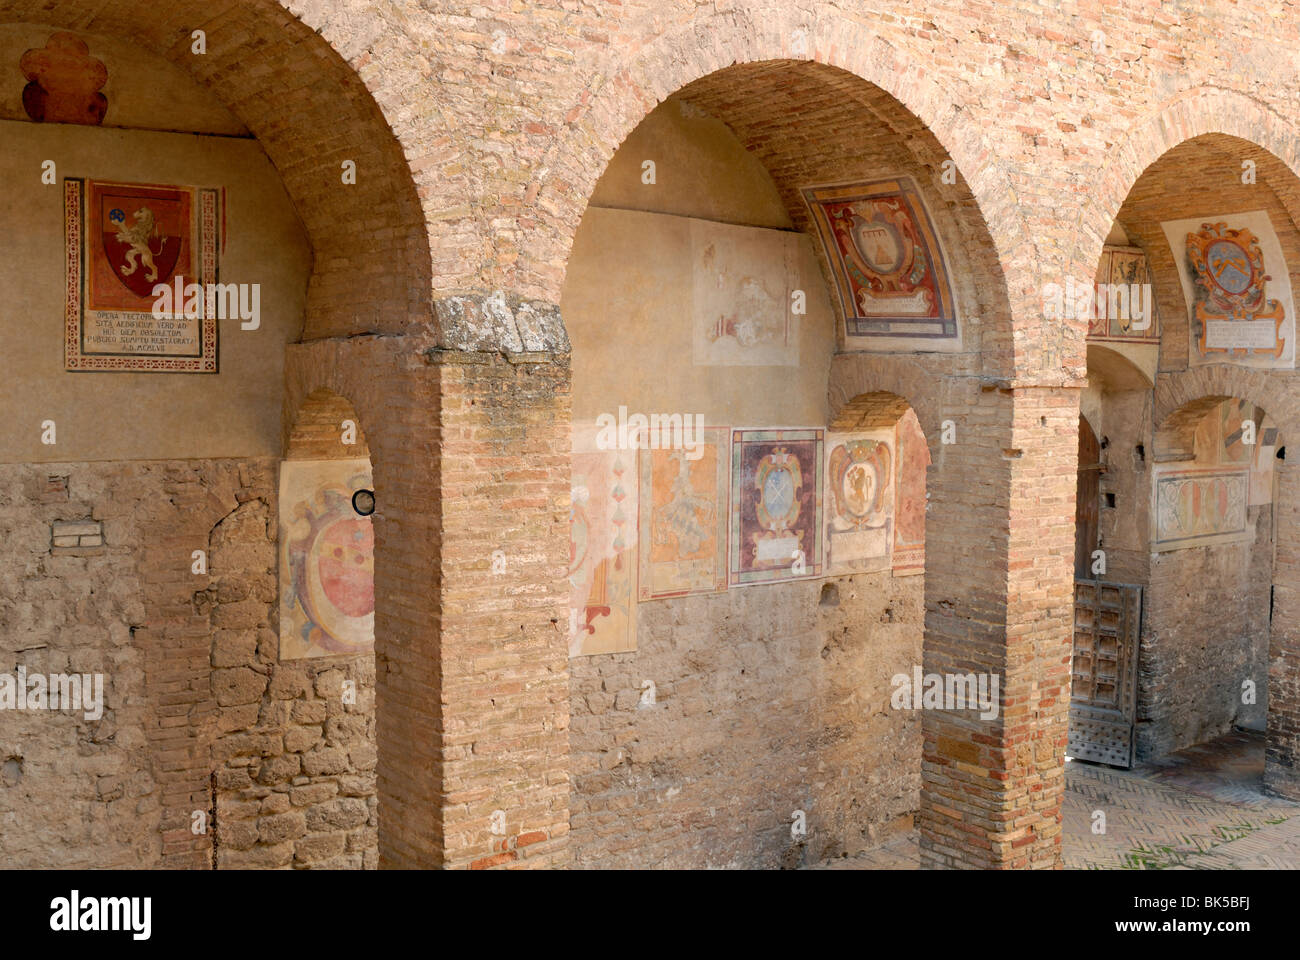 The Worn Frescoes Of The Coats Of Arms Of City Mayors And Magistrates In The Courtyard Of The